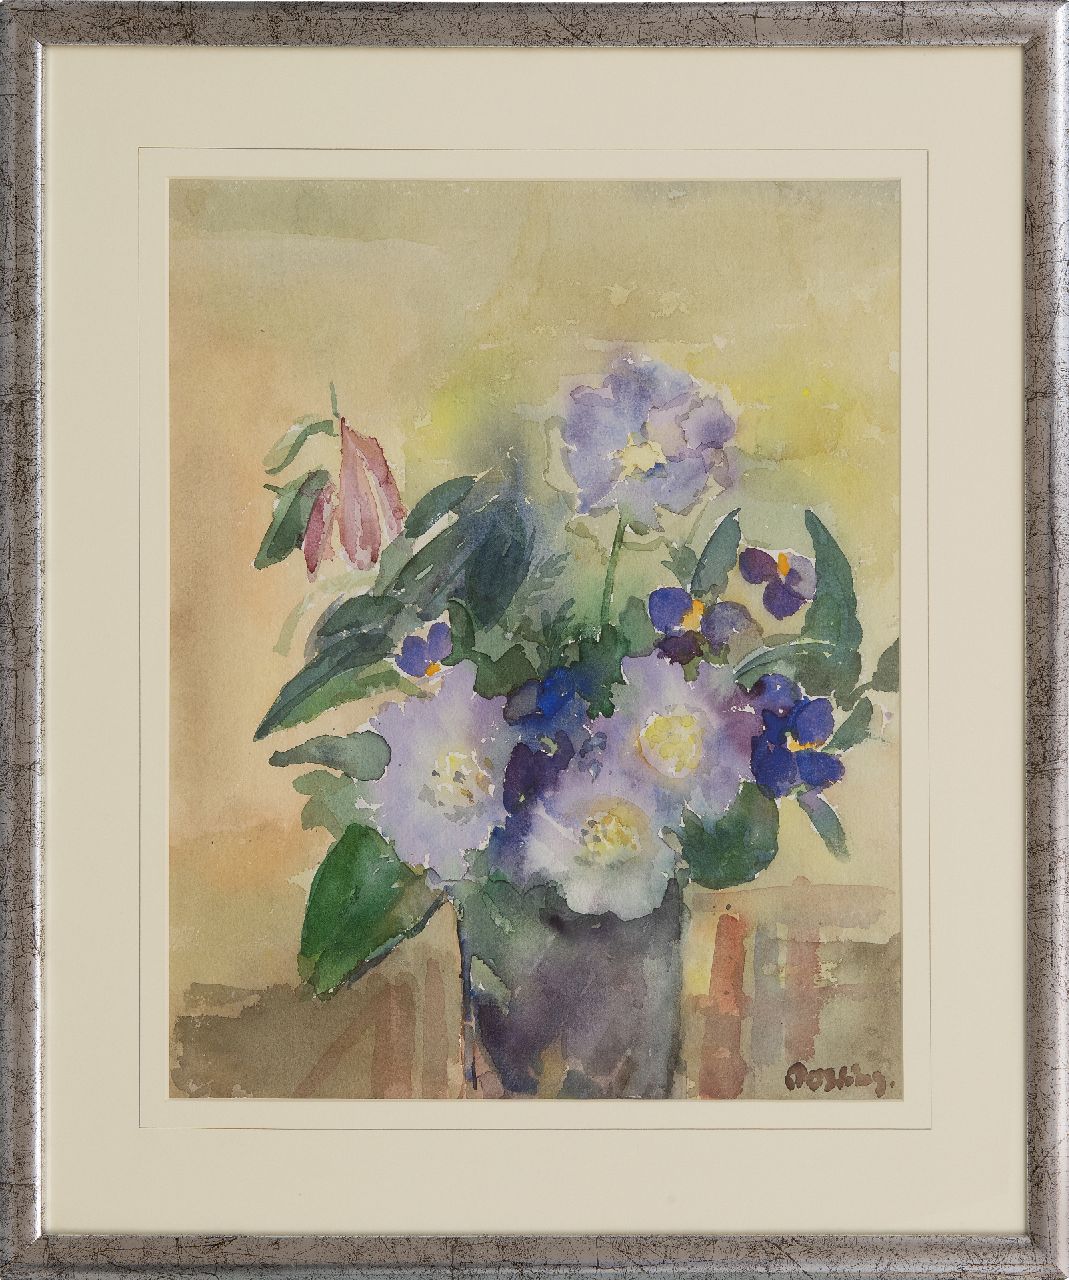 Bieruma Oosting A.J.W.  | Adriana Johanna Wilhelmina 'Jeanne' Bieruma Oosting | Watercolours and drawings offered for sale | Flower still life, watercolour on paper 41.5 x 33.5 cm, signed l.r.